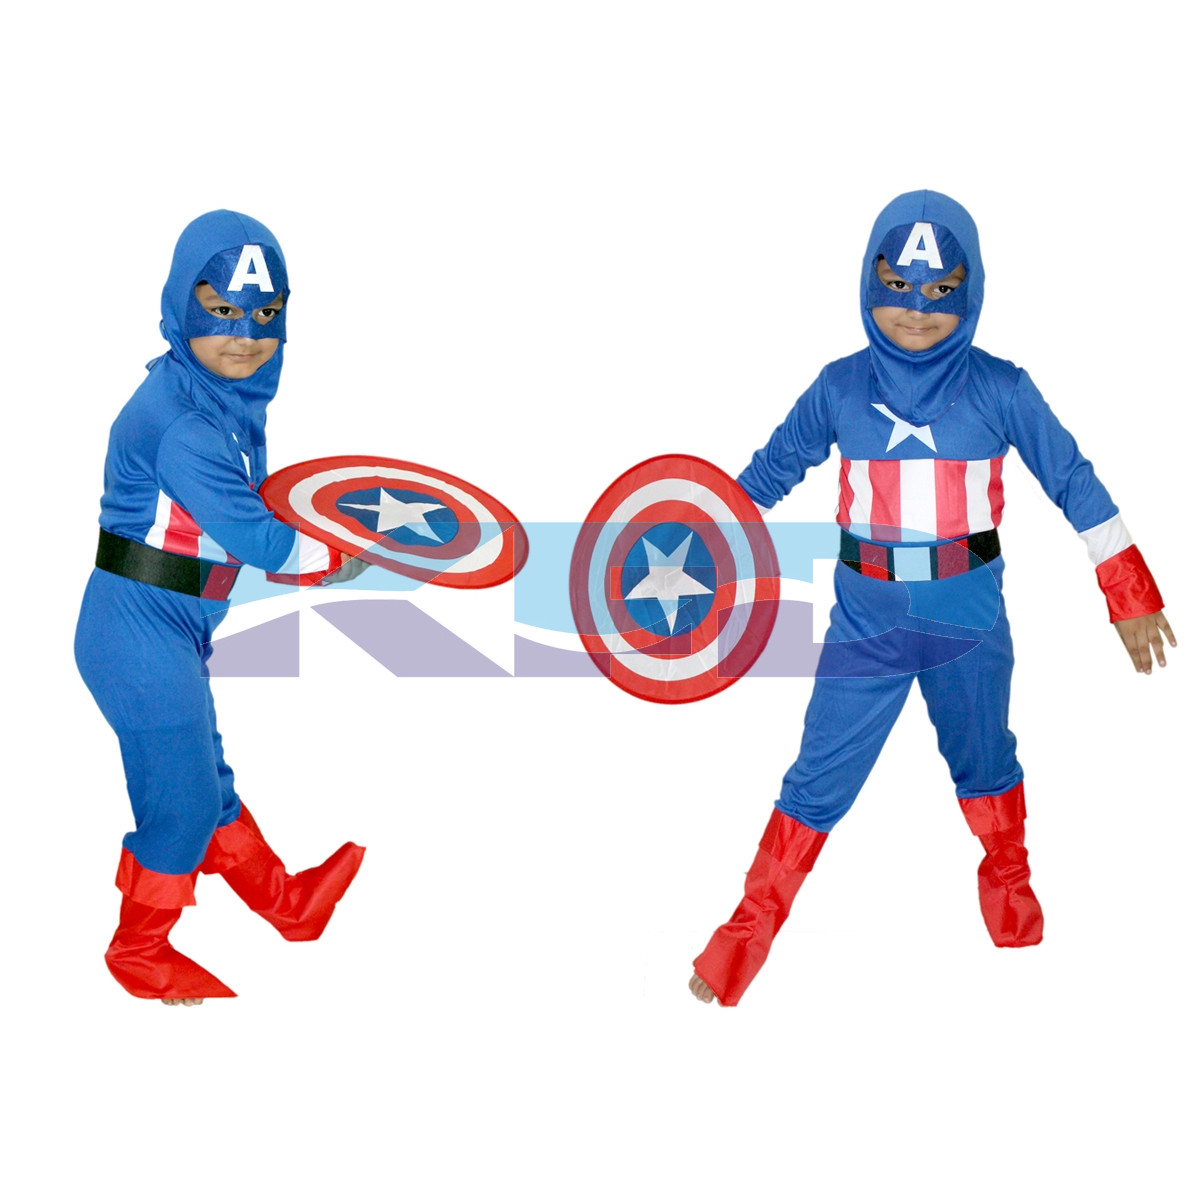 Captain America brave Little Soldier Super Hero Cosplay Costume for kids 3 to 8 years